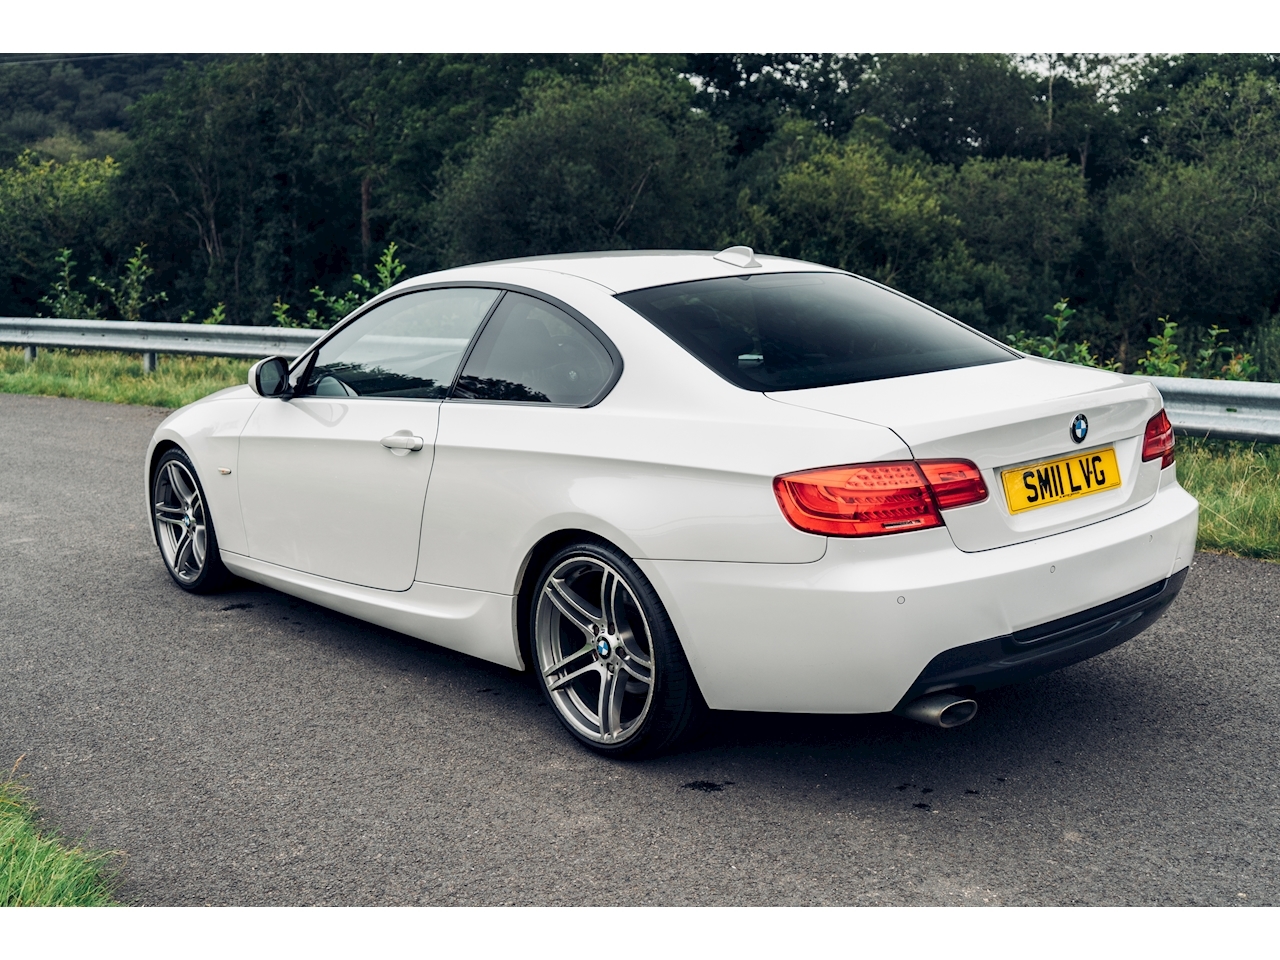 3 Series 320d M Sport Coupe Coupe 2.0 Manual Diesel